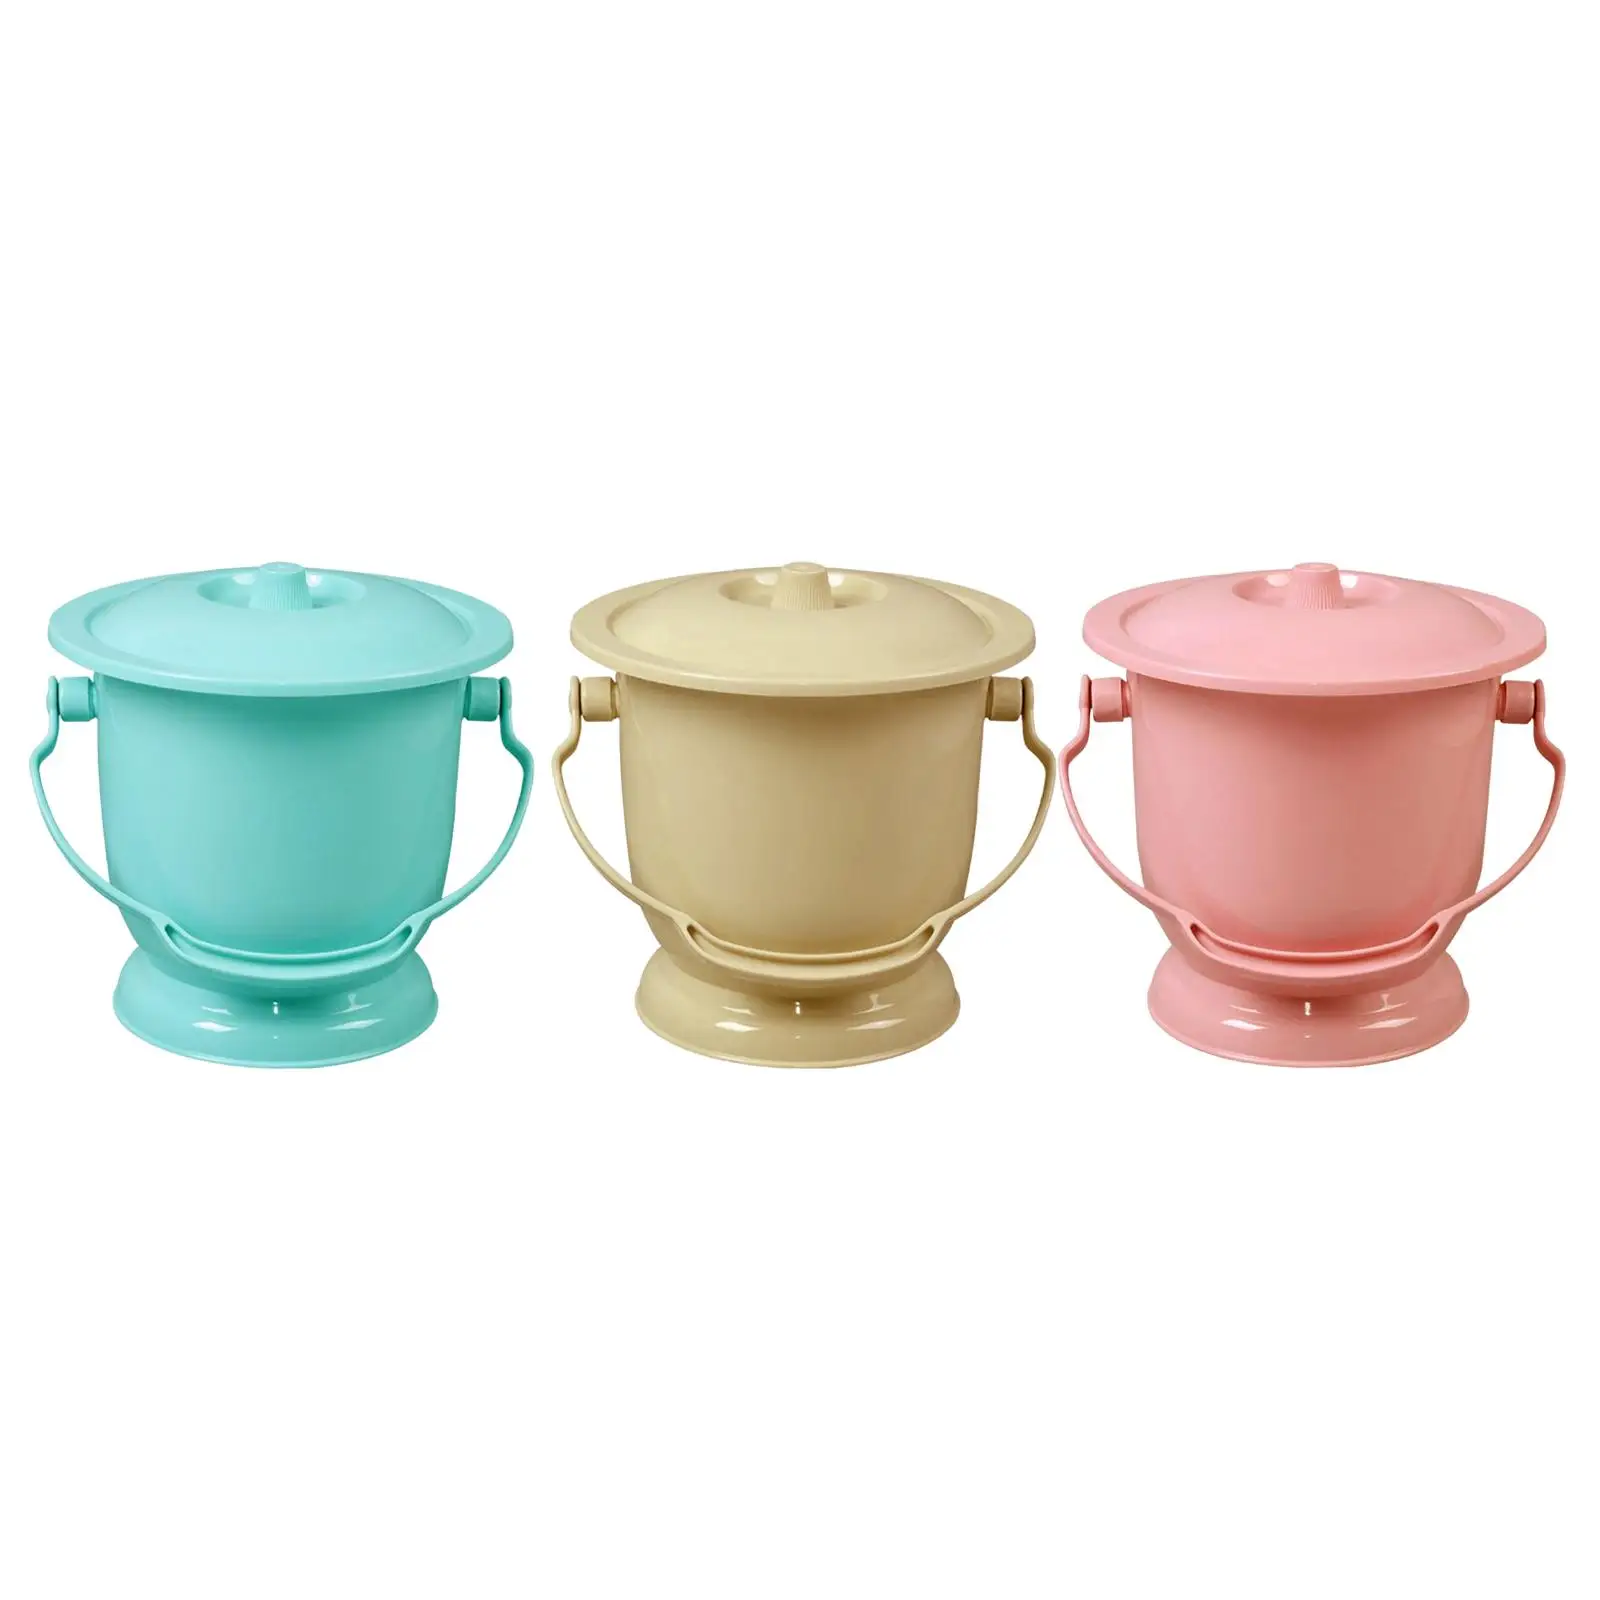 

Chamber Pot with Lid Spittoon Bedpan Children Adults Indoor Practical PP Plastic Night Pot Pee Potty Mini Toilets Urinal Bottle